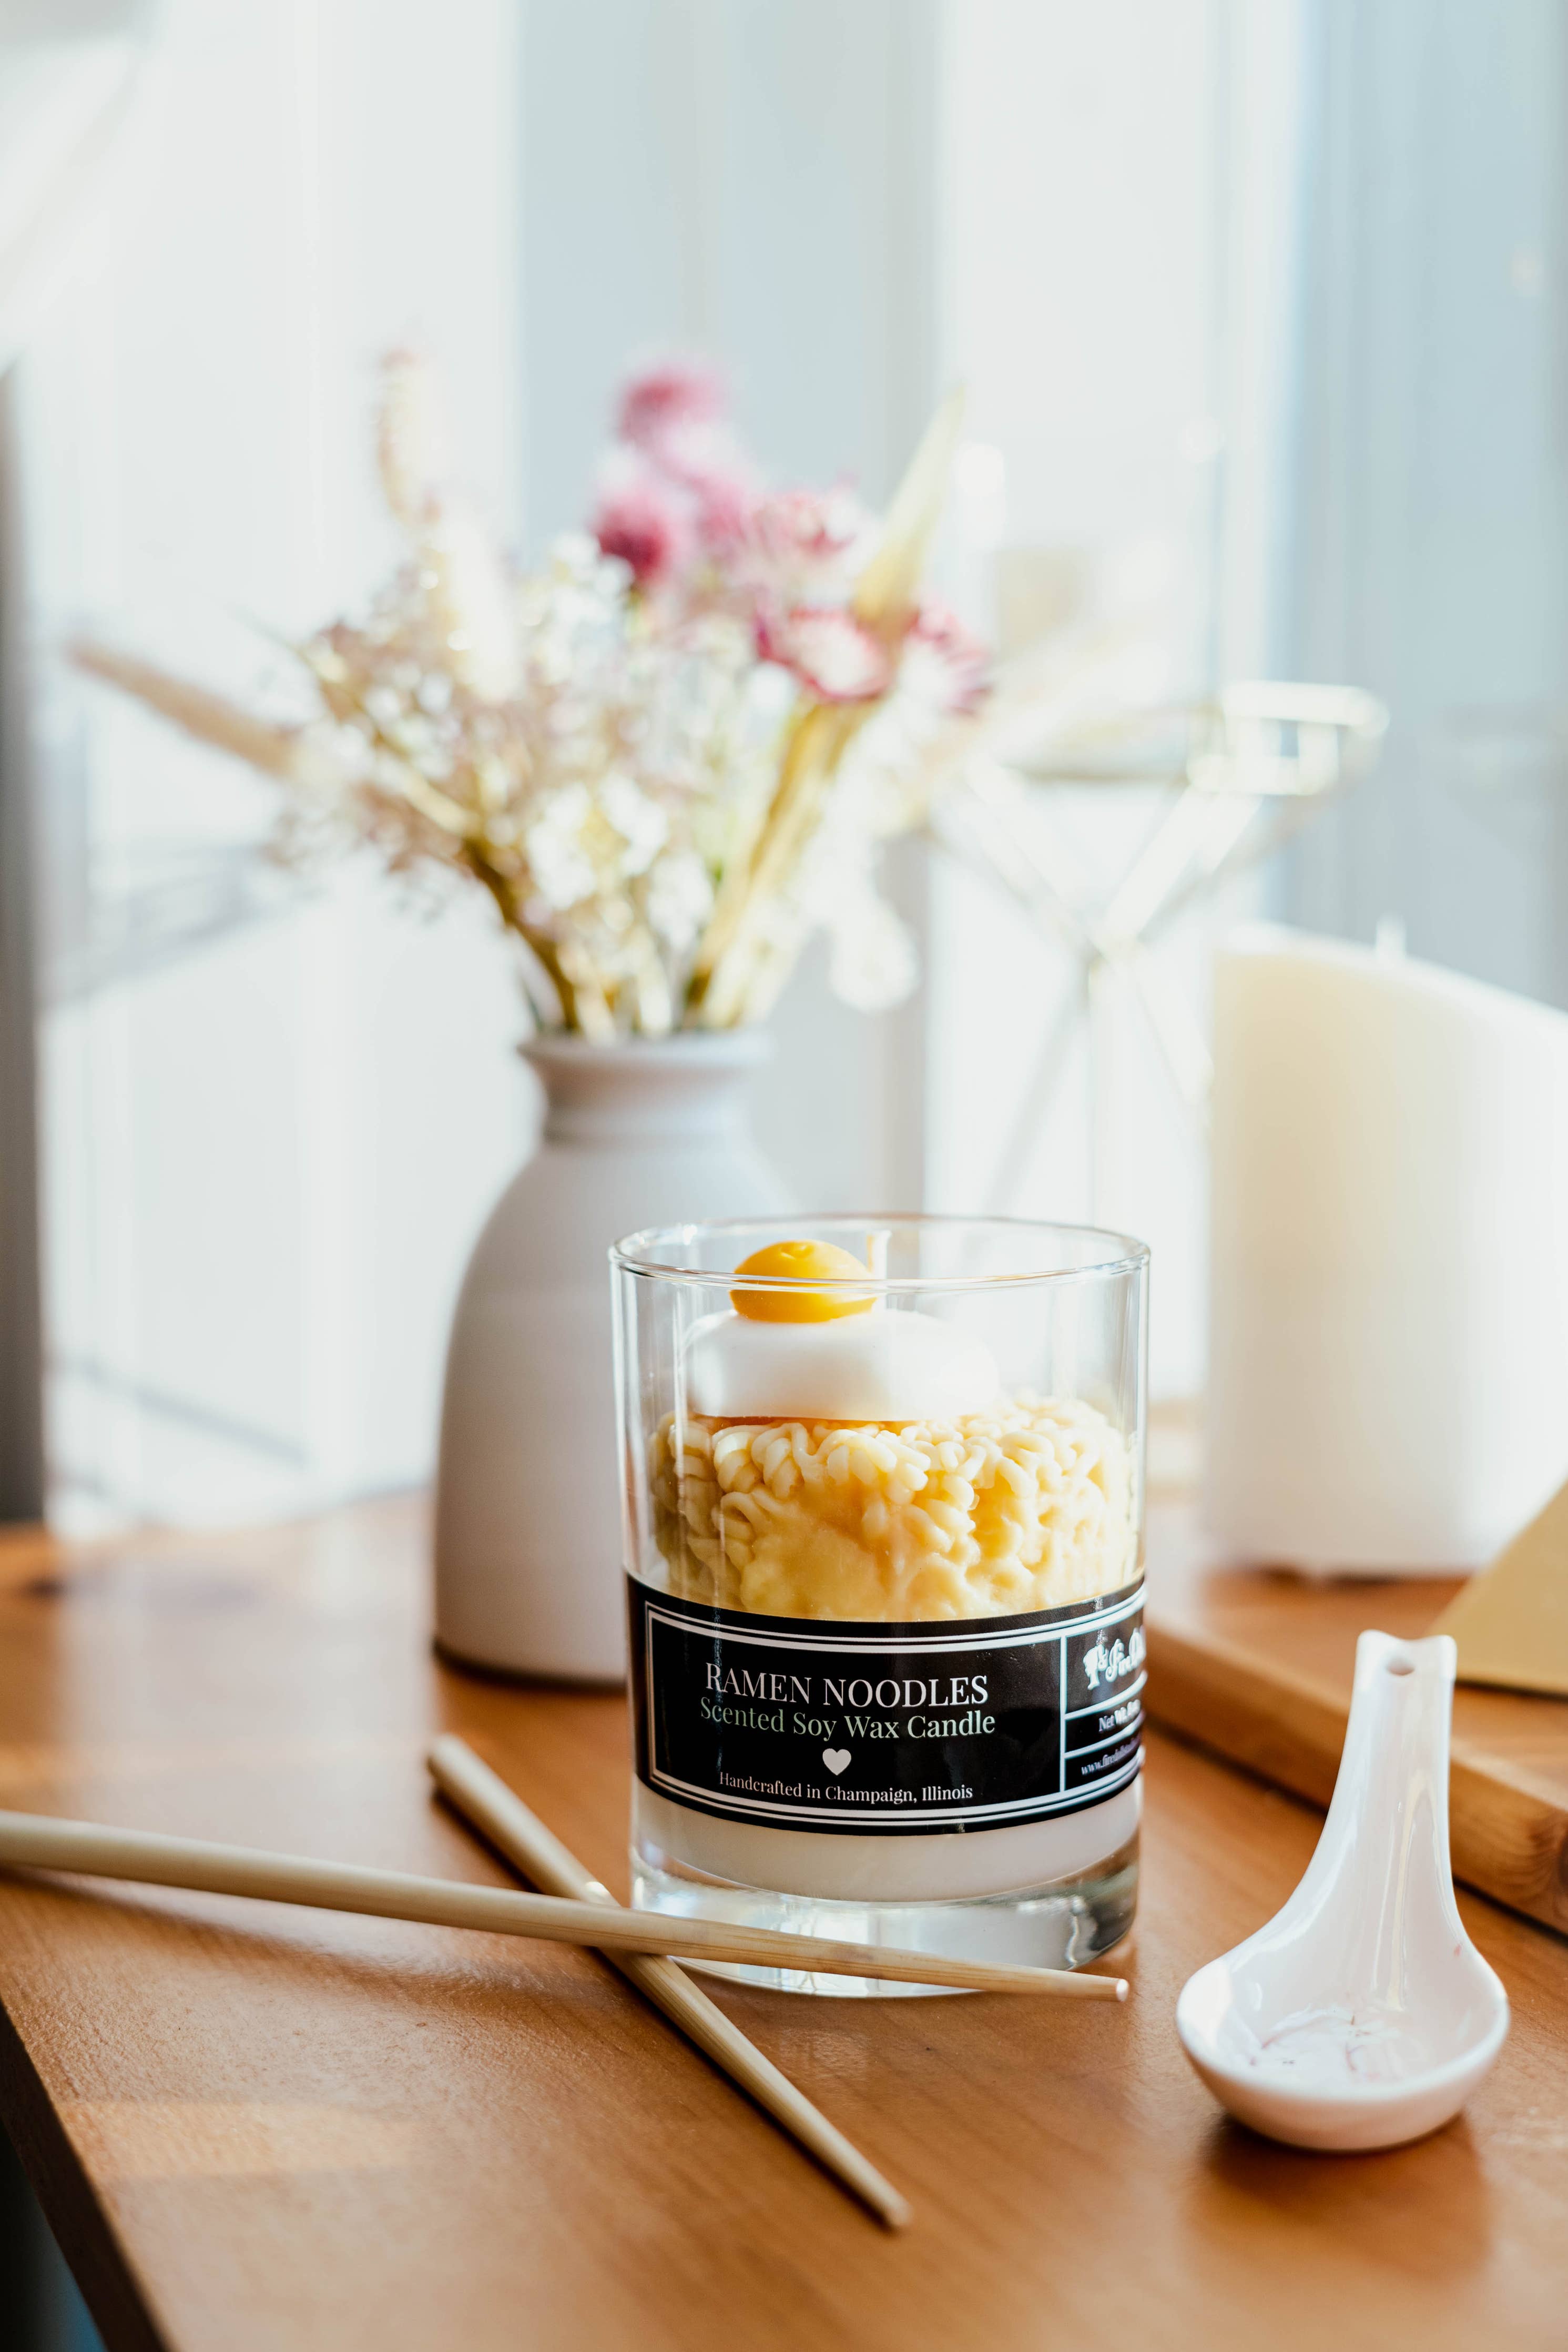 Adorable Ramen Noodles Scented Soy Wax Candle!